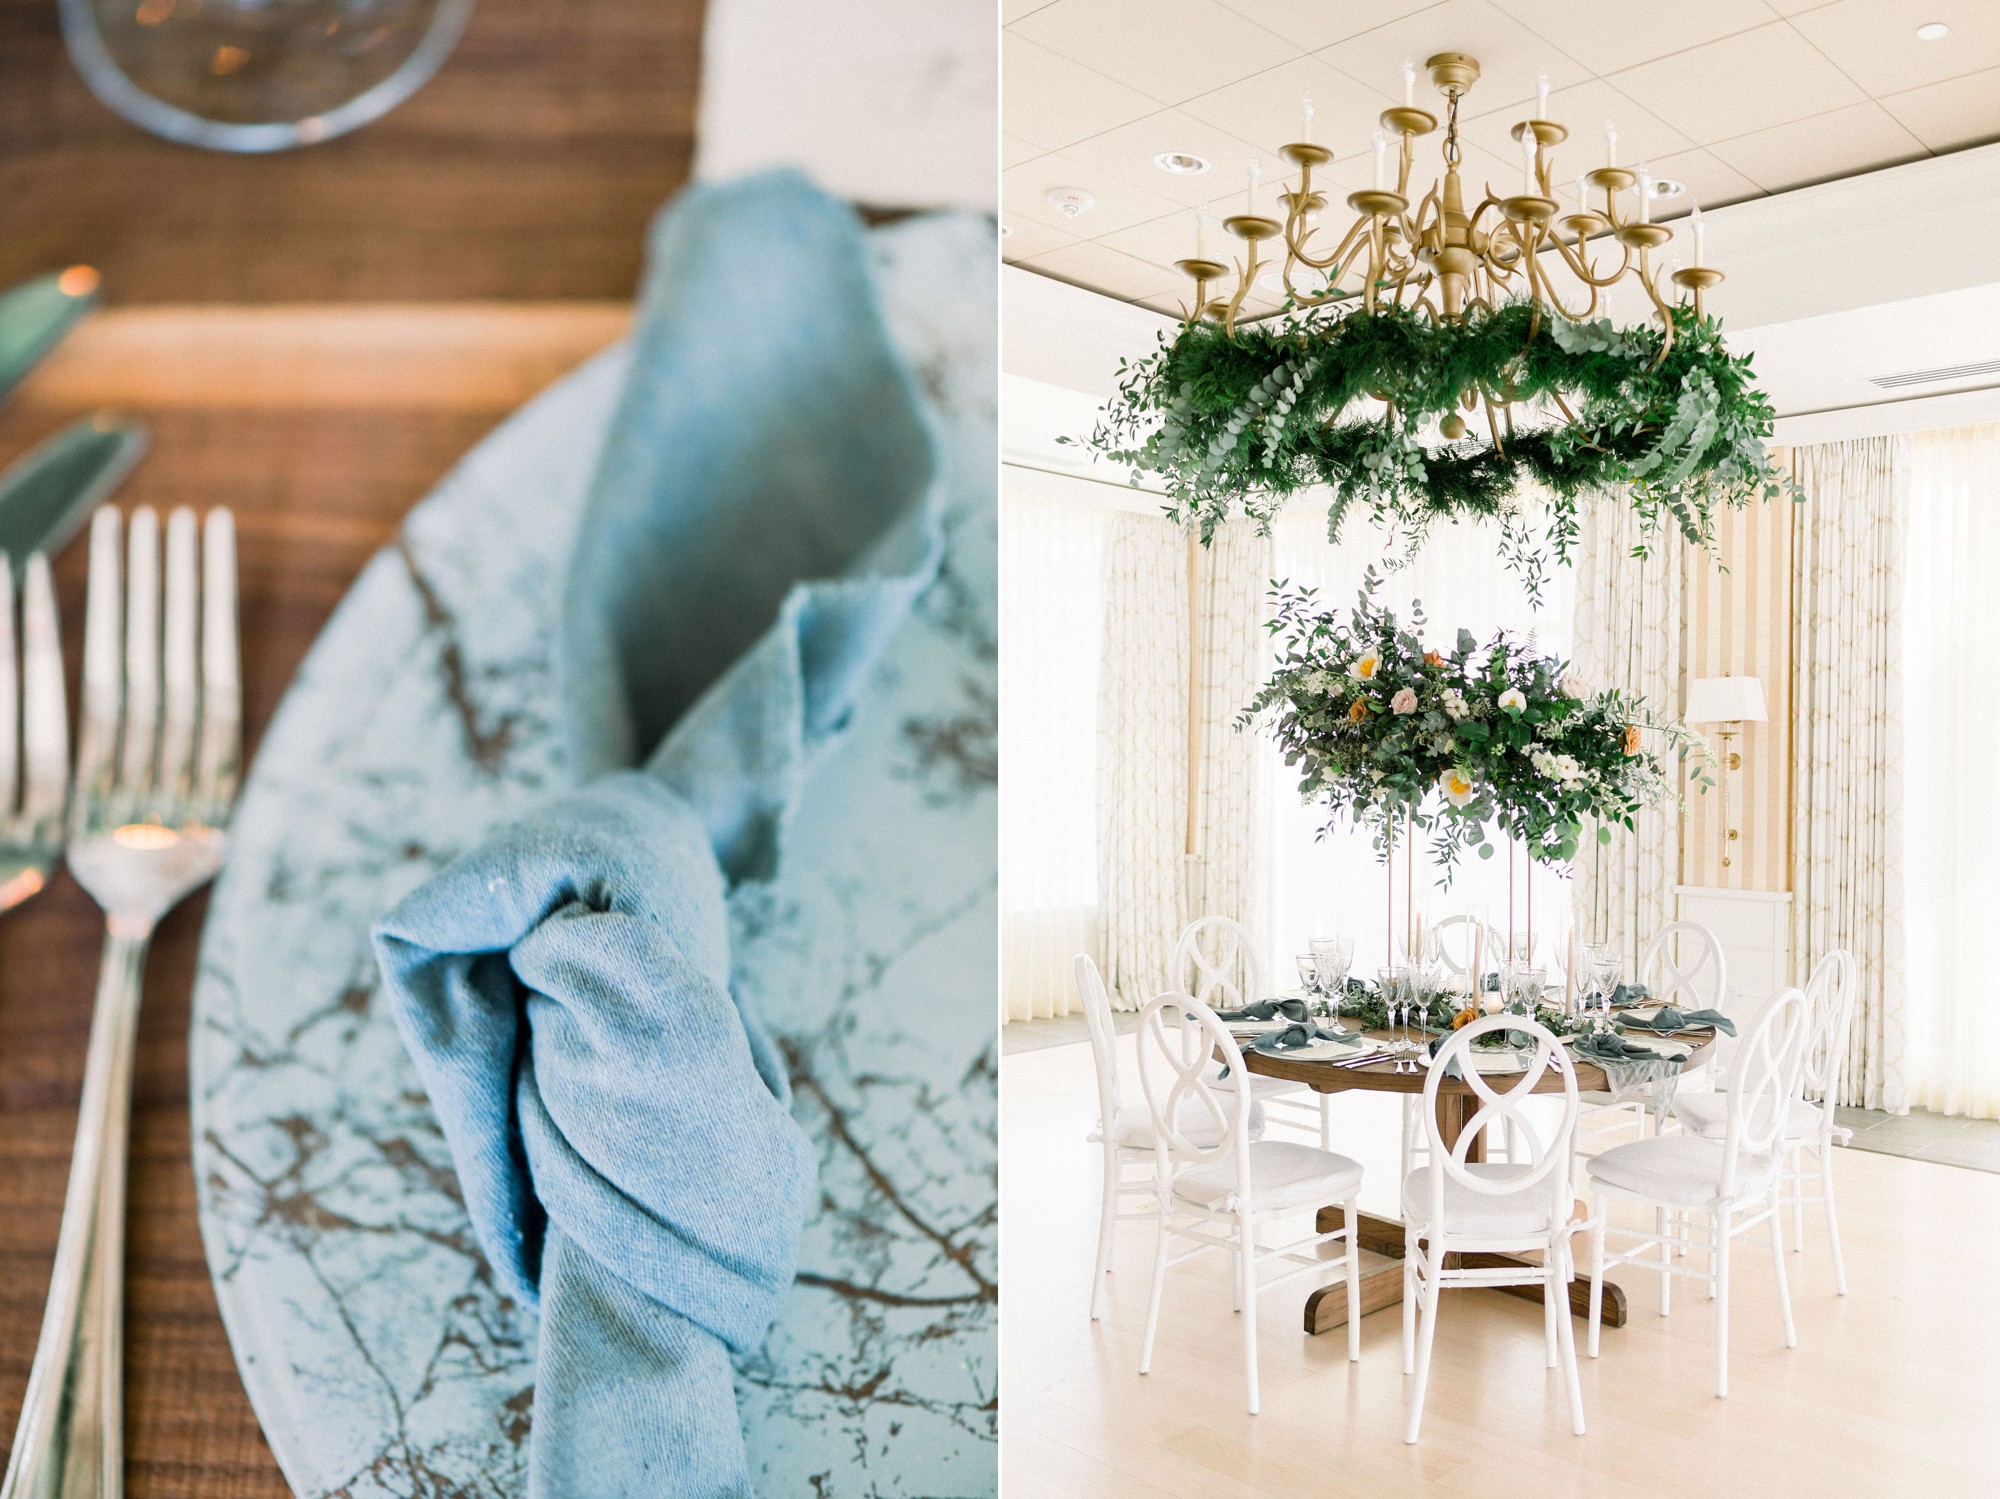 Gloucester MA Beauport Hotel Wedding | Tuscan meets modern | Party Rental LTD white chairs, round farm table, glass marble charger, glassware, and cloth napkins | hand lettered calligraphy wedding menus | modern hanging reception flowers by Lilac & Lily | Reception inspiration